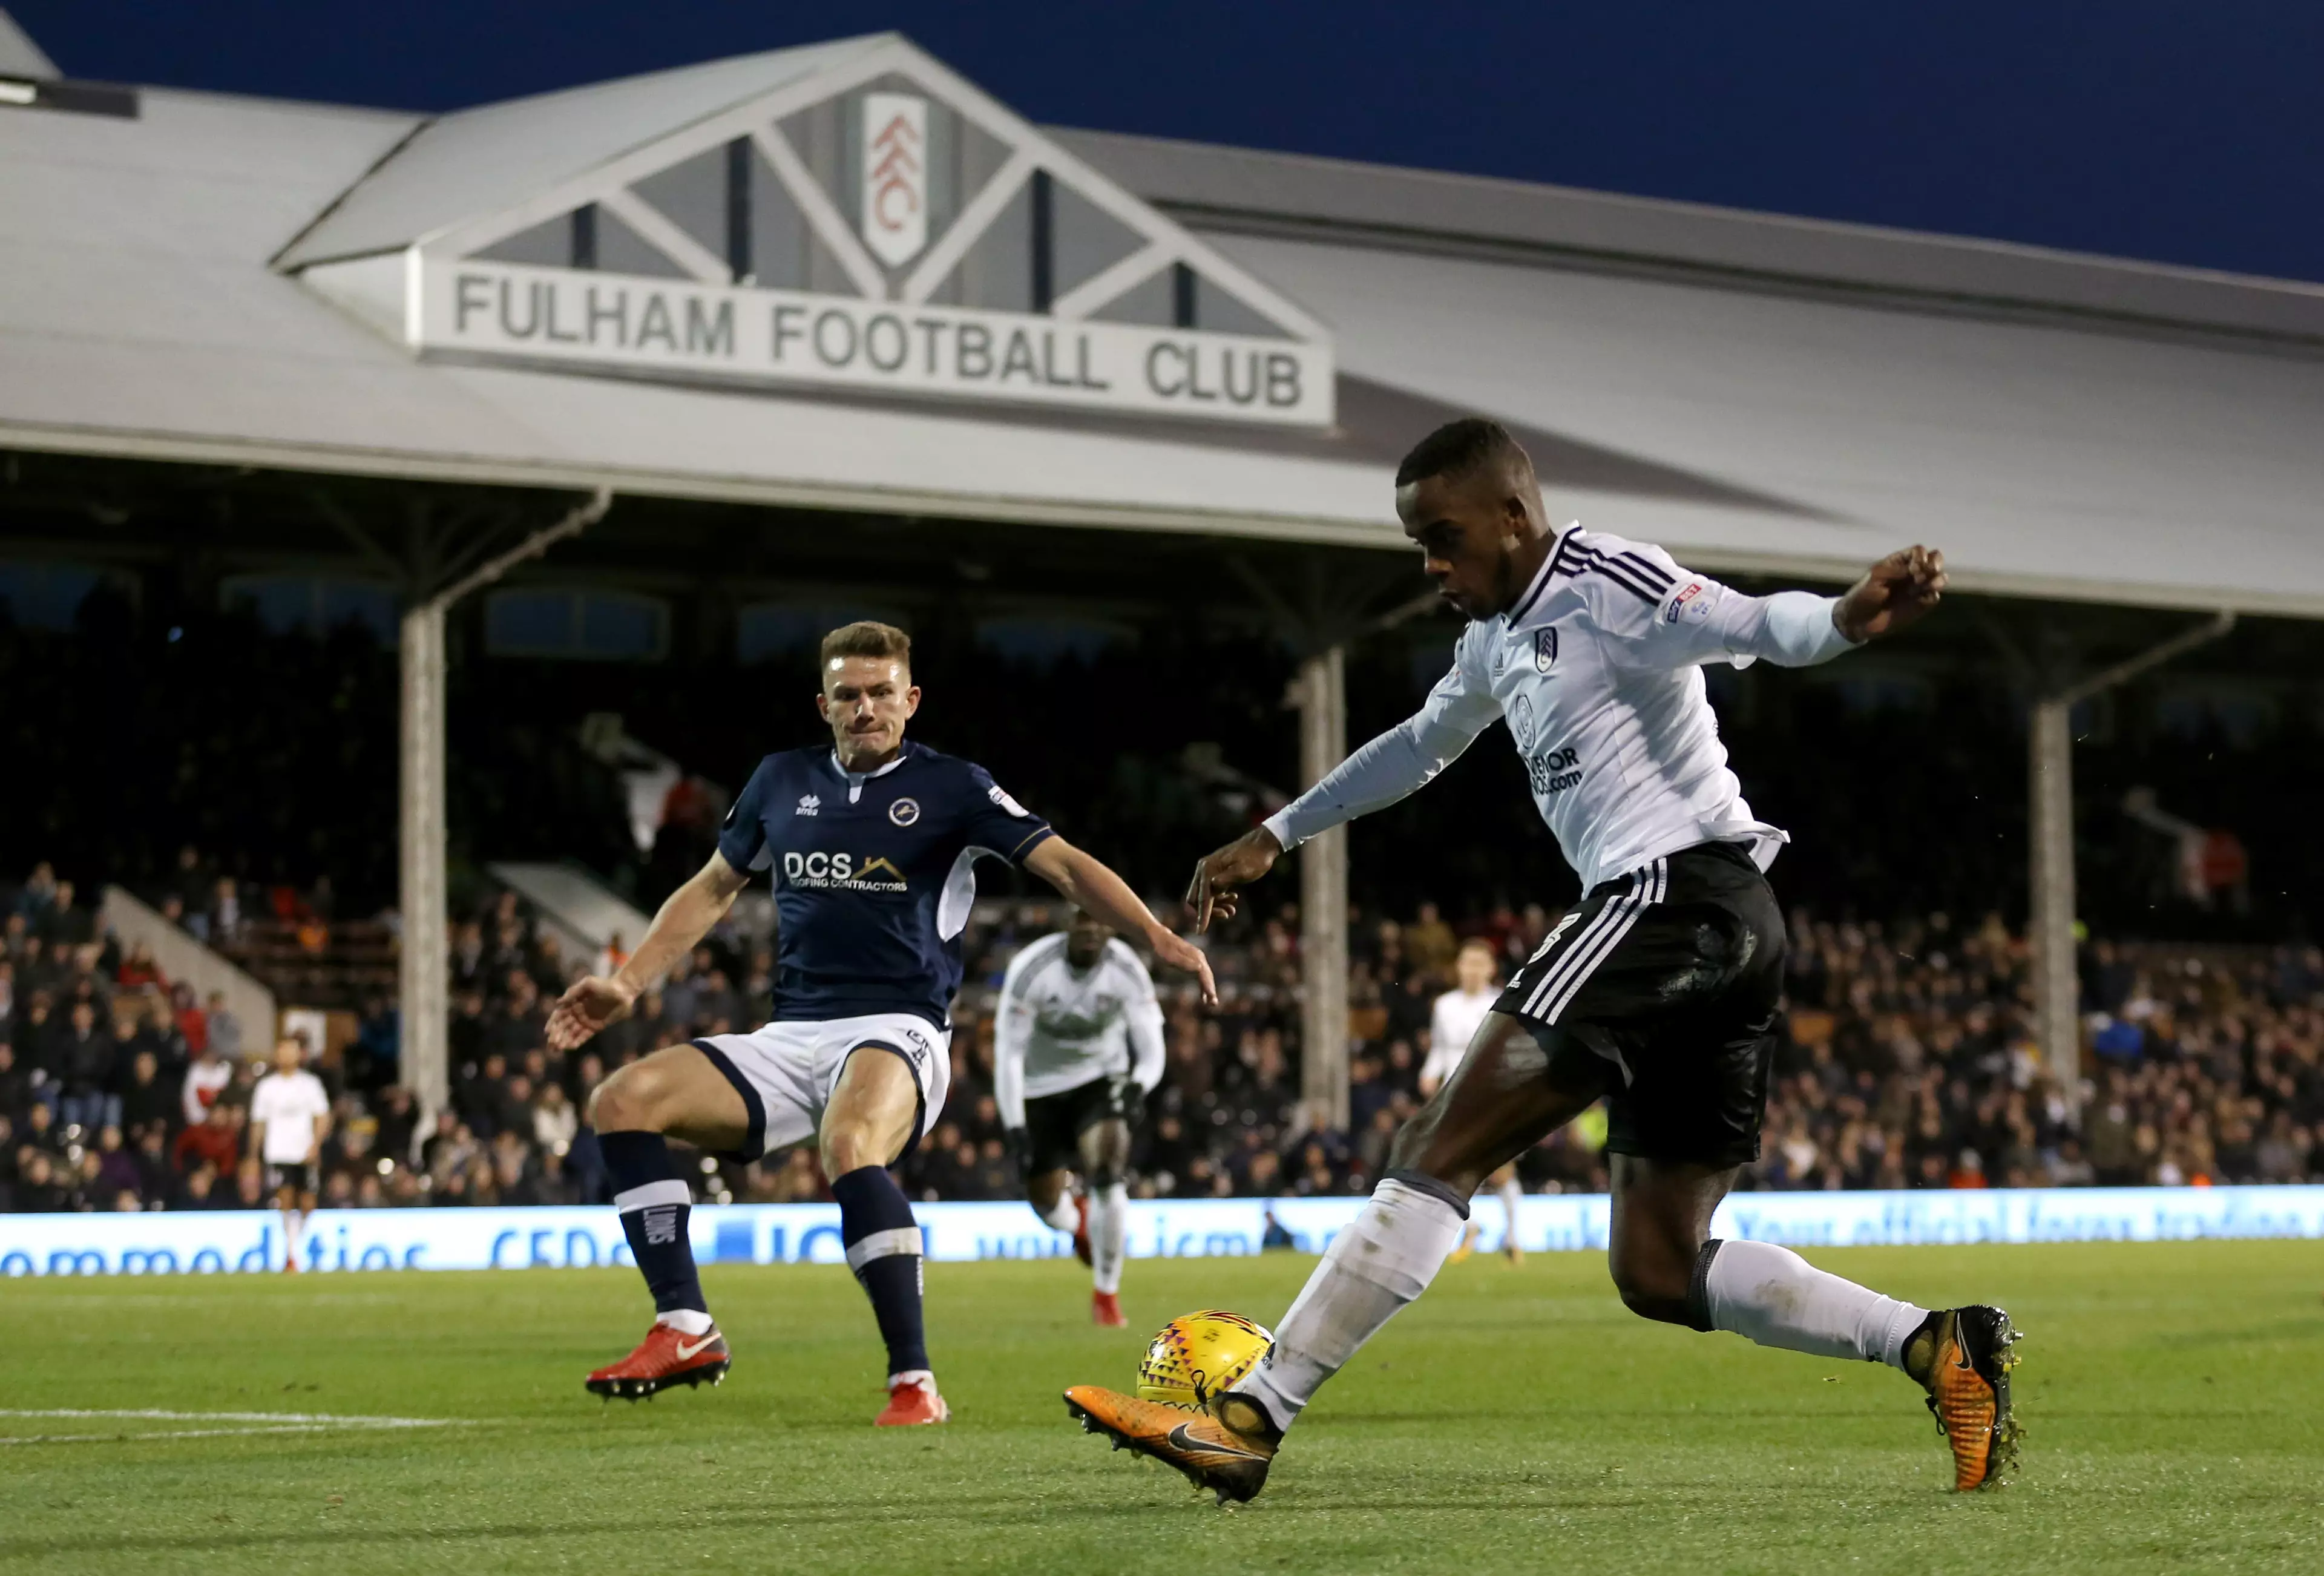 Sessegnon has impressed for Fulham in the last two years. Image: PA Images.